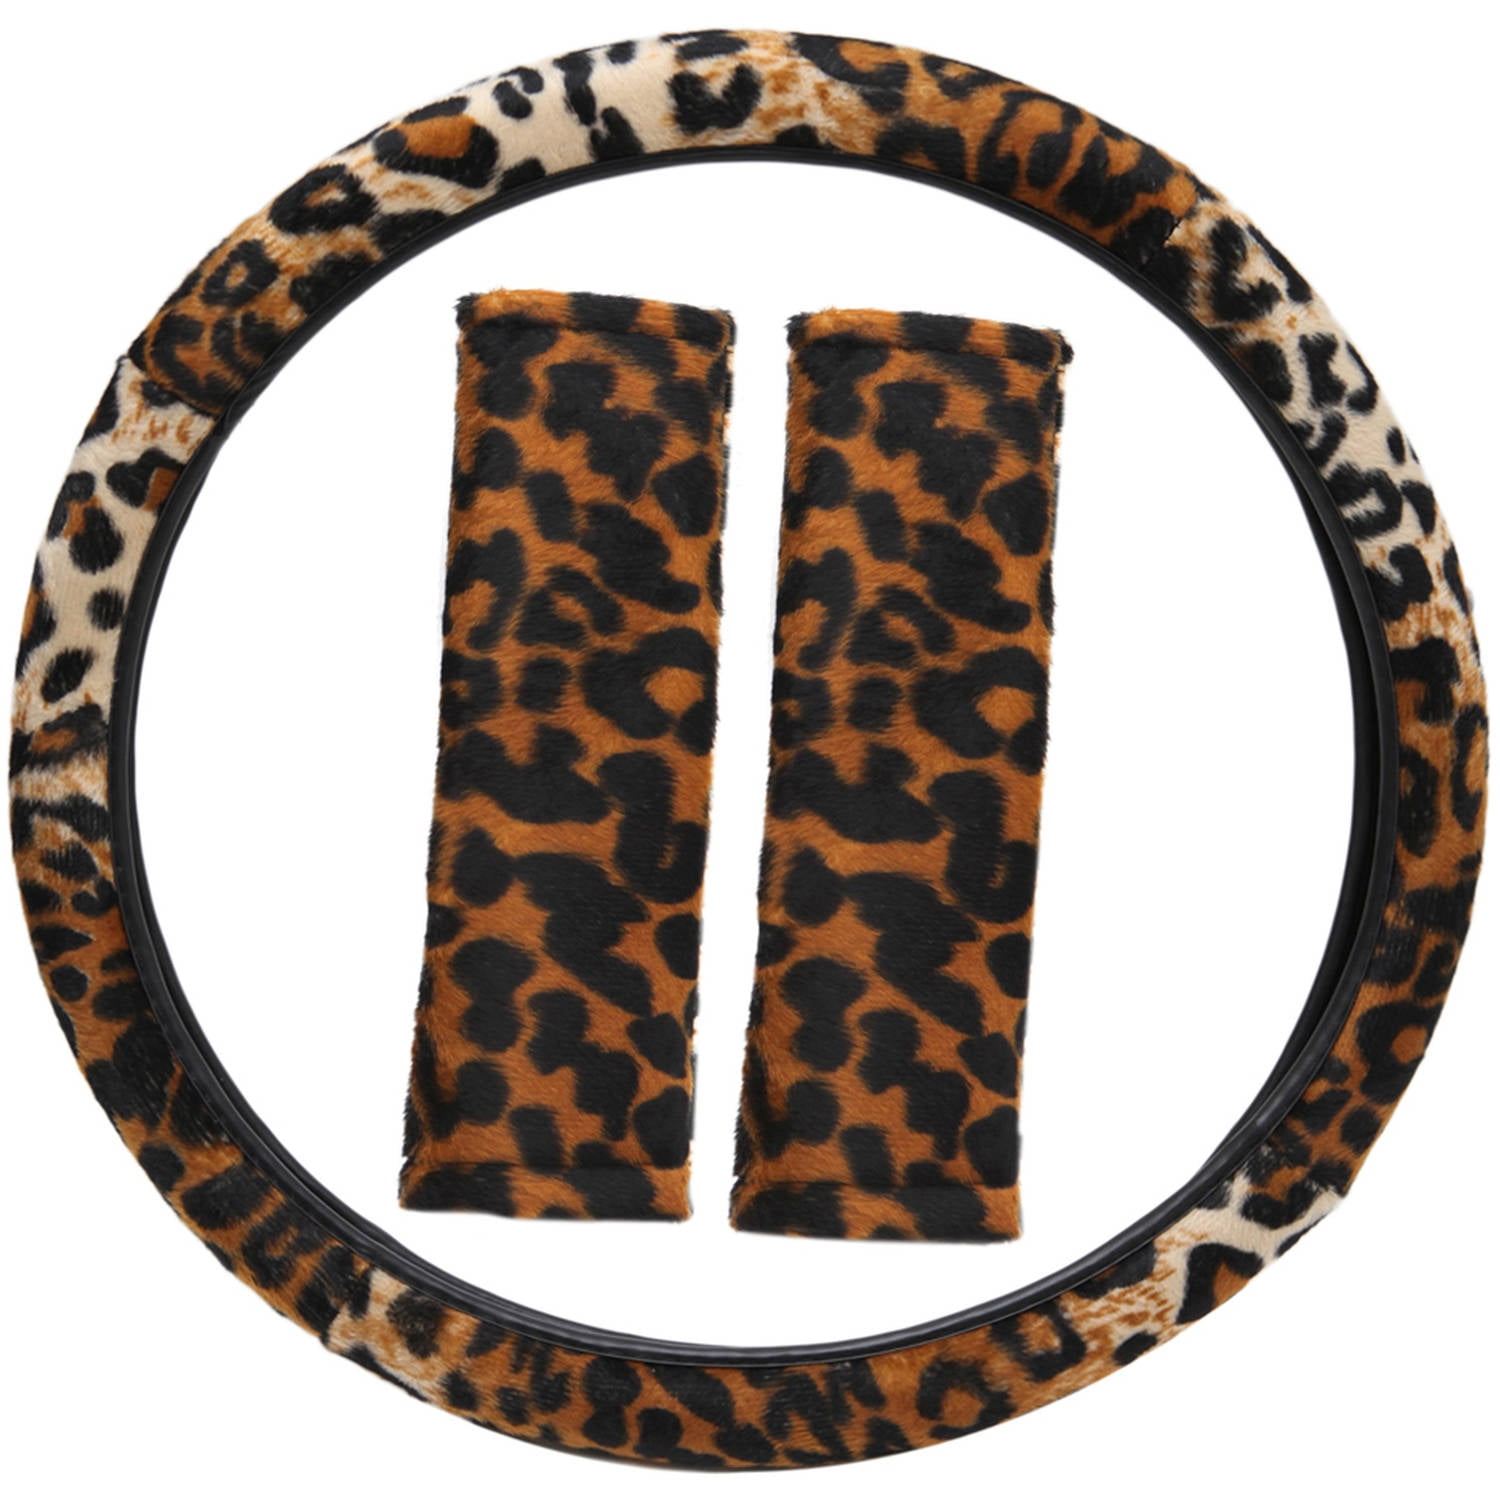 Leopard Zone Tech Animal Print Steering Wheel Cover and Shoulder Pad 